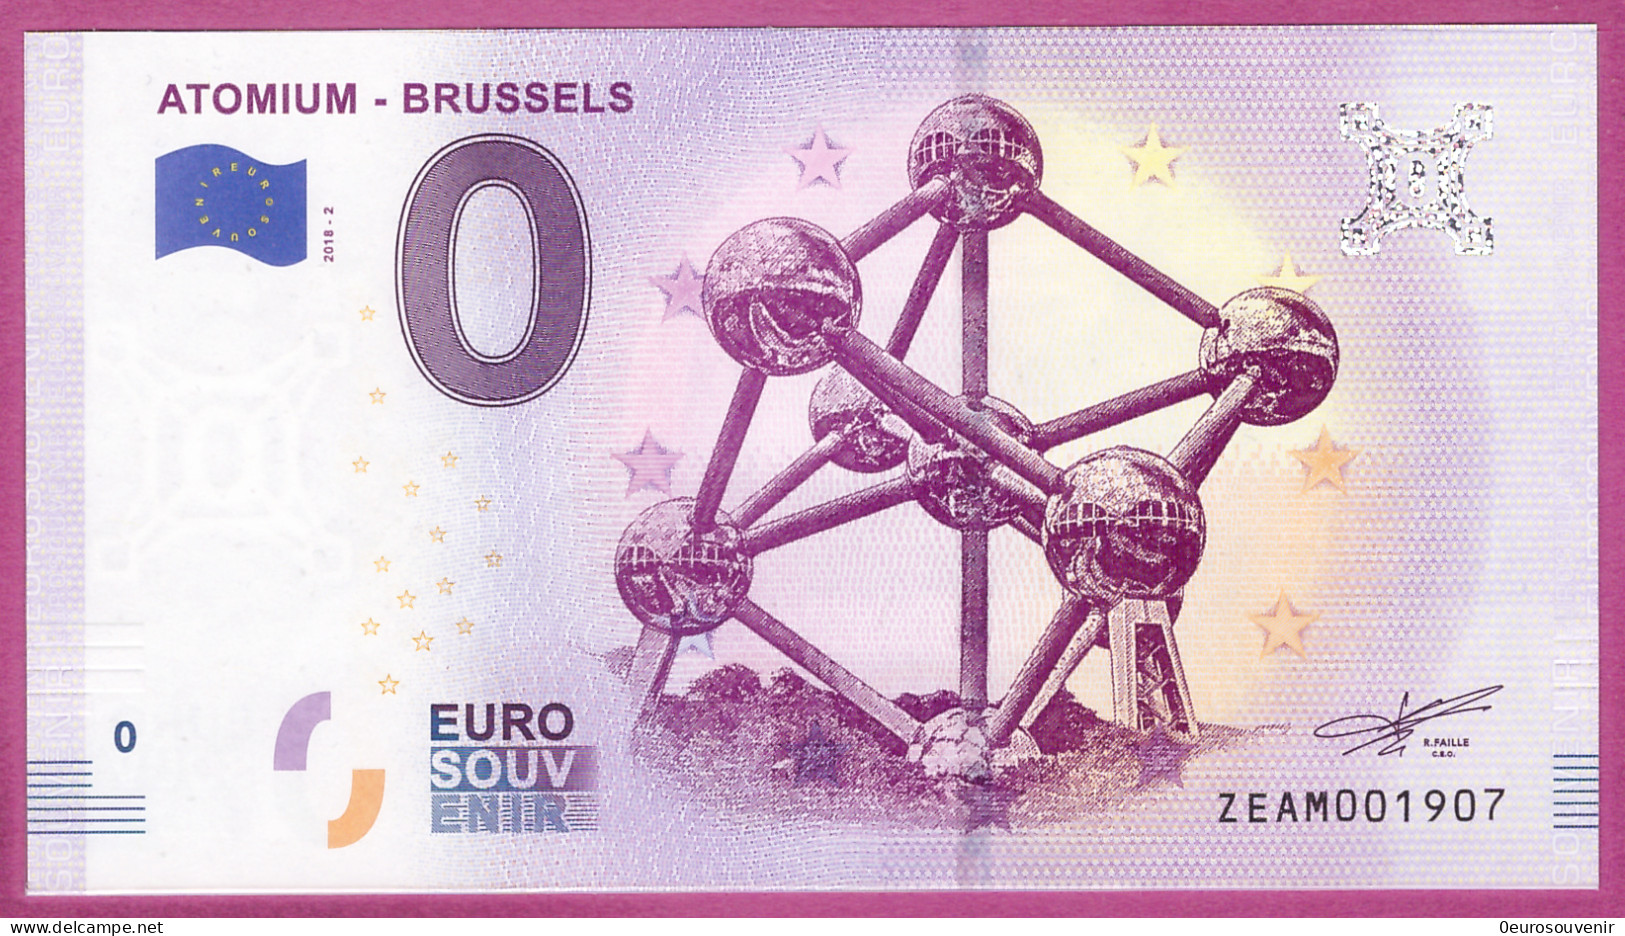 0-Euro ZEAM 2018-2  ATOMIUM - BRUSSELS - Private Proofs / Unofficial